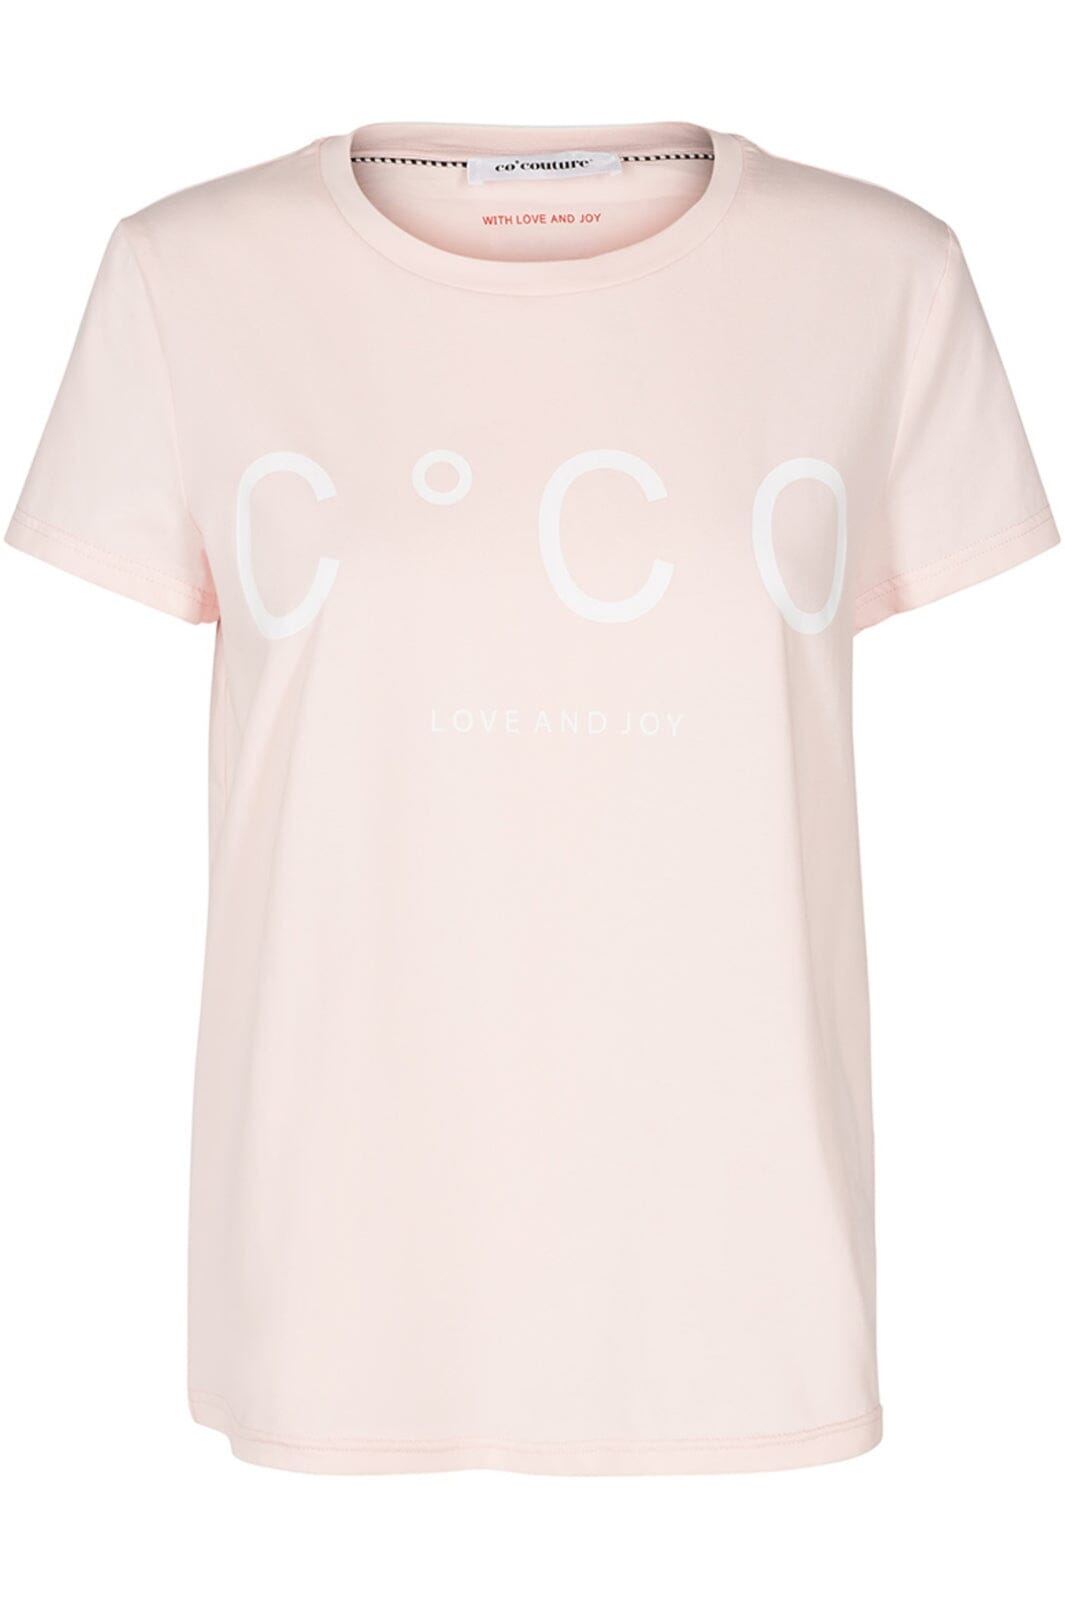 Co´couture - Coco Signature Tee - 123 Nude Rose T-shirts 